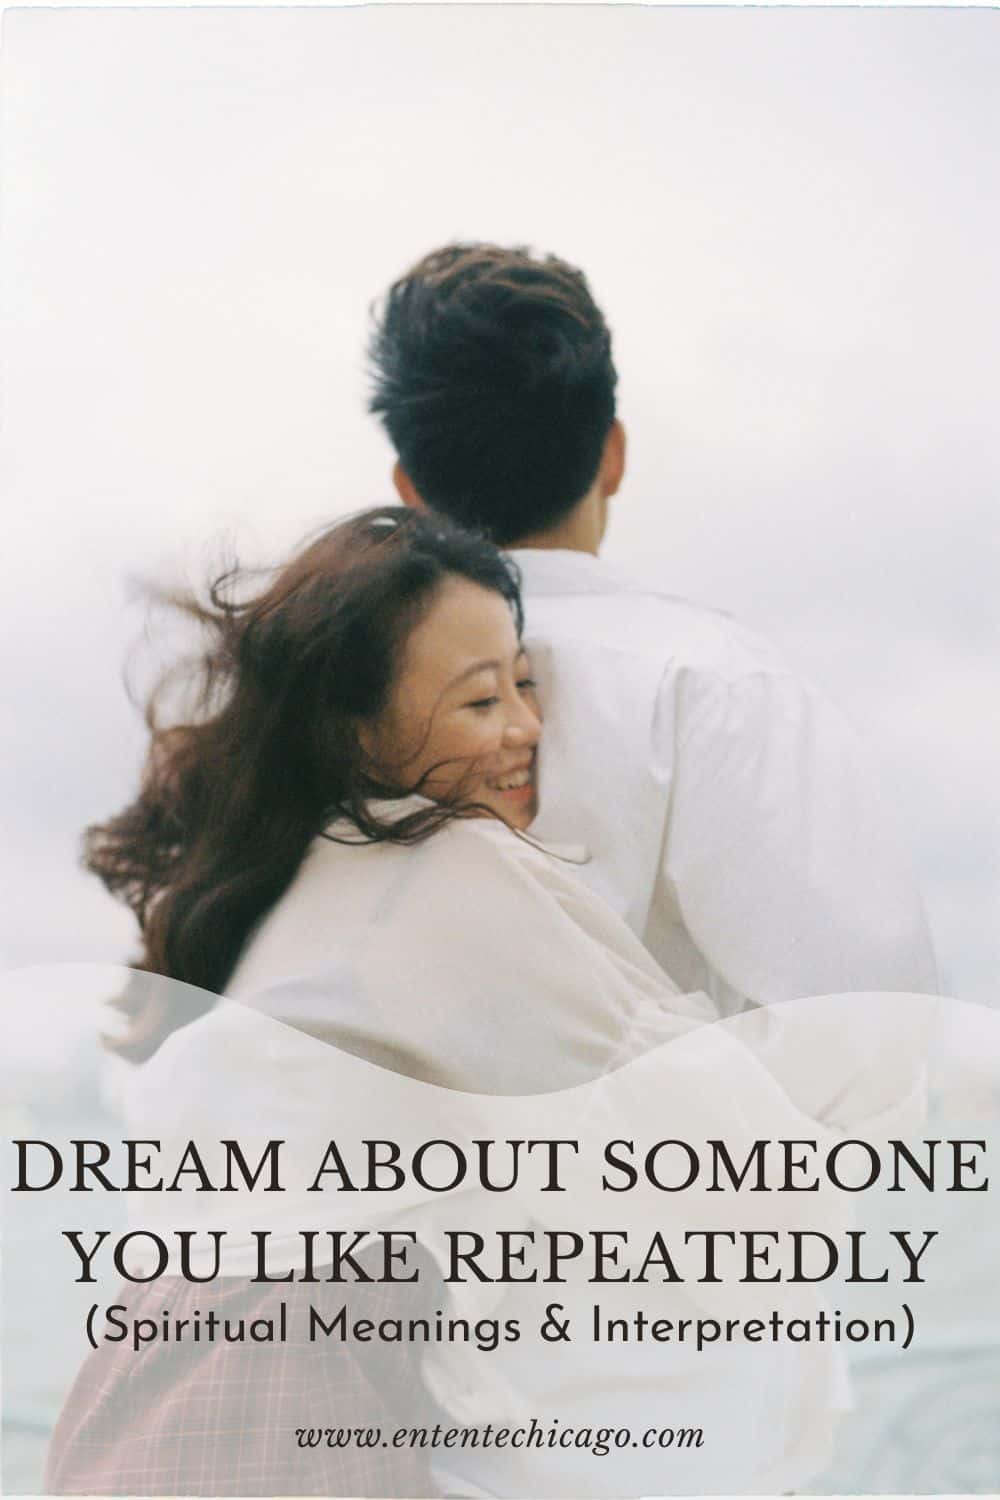 Why do you dream about someone repeatedly?